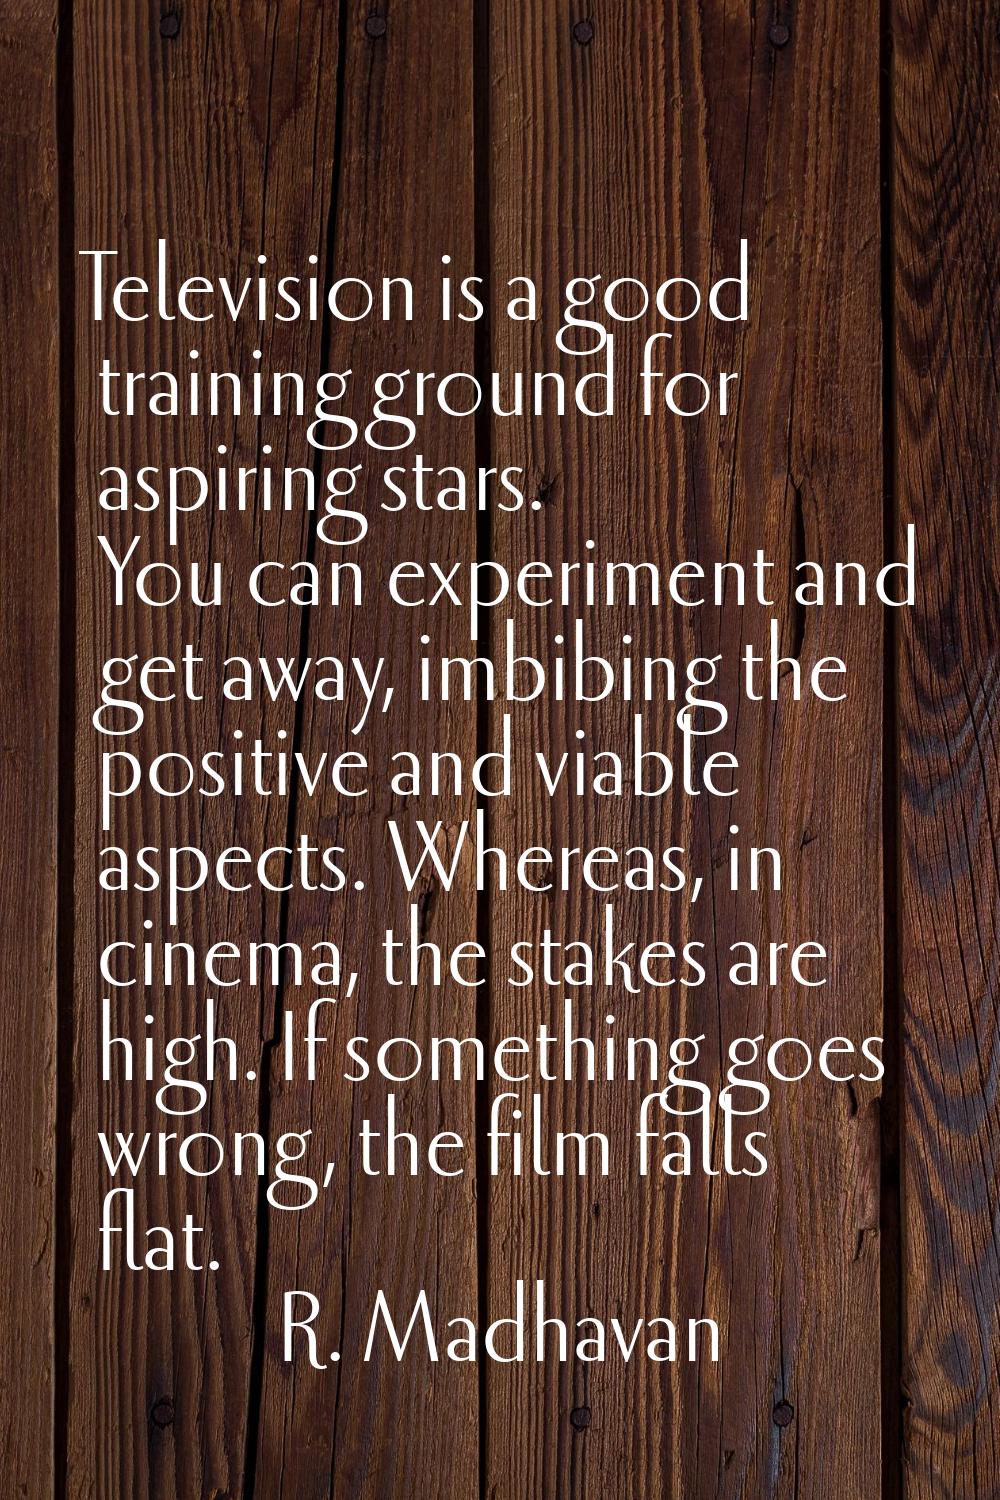 Television is a good training ground for aspiring stars. You can experiment and get away, imbibing 